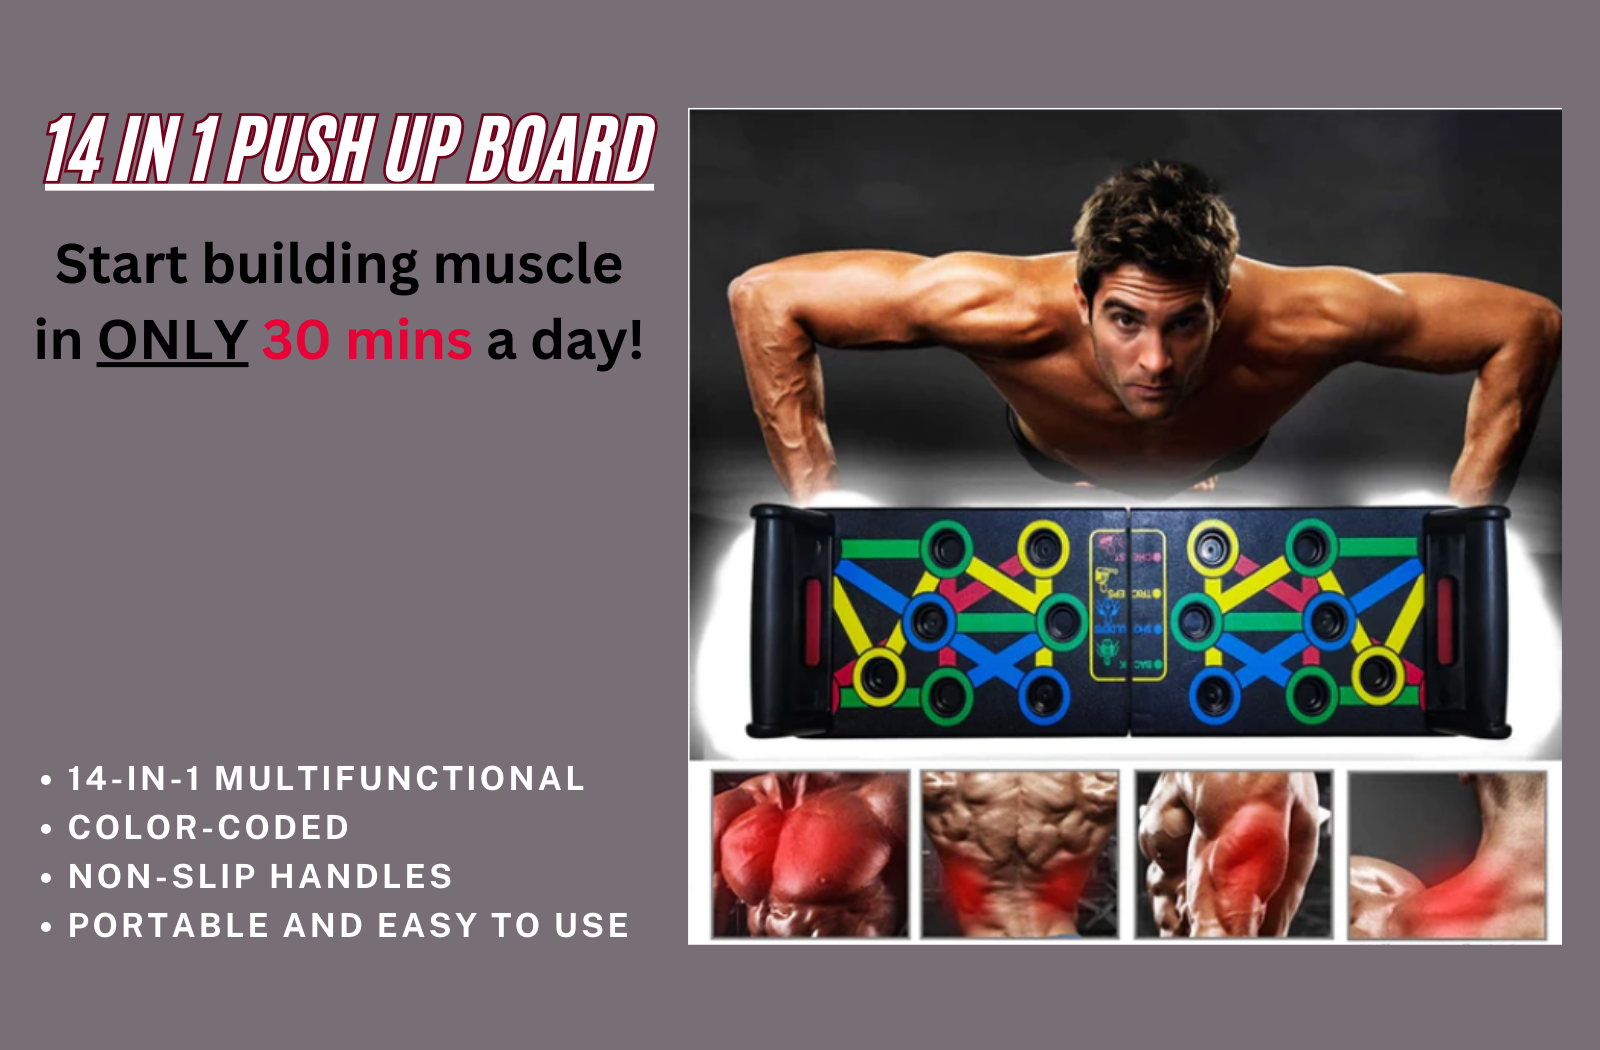 Our strength training Push Up Board helps you to burn calories and build strength, leading you through a total-body strength and conditioning workout.